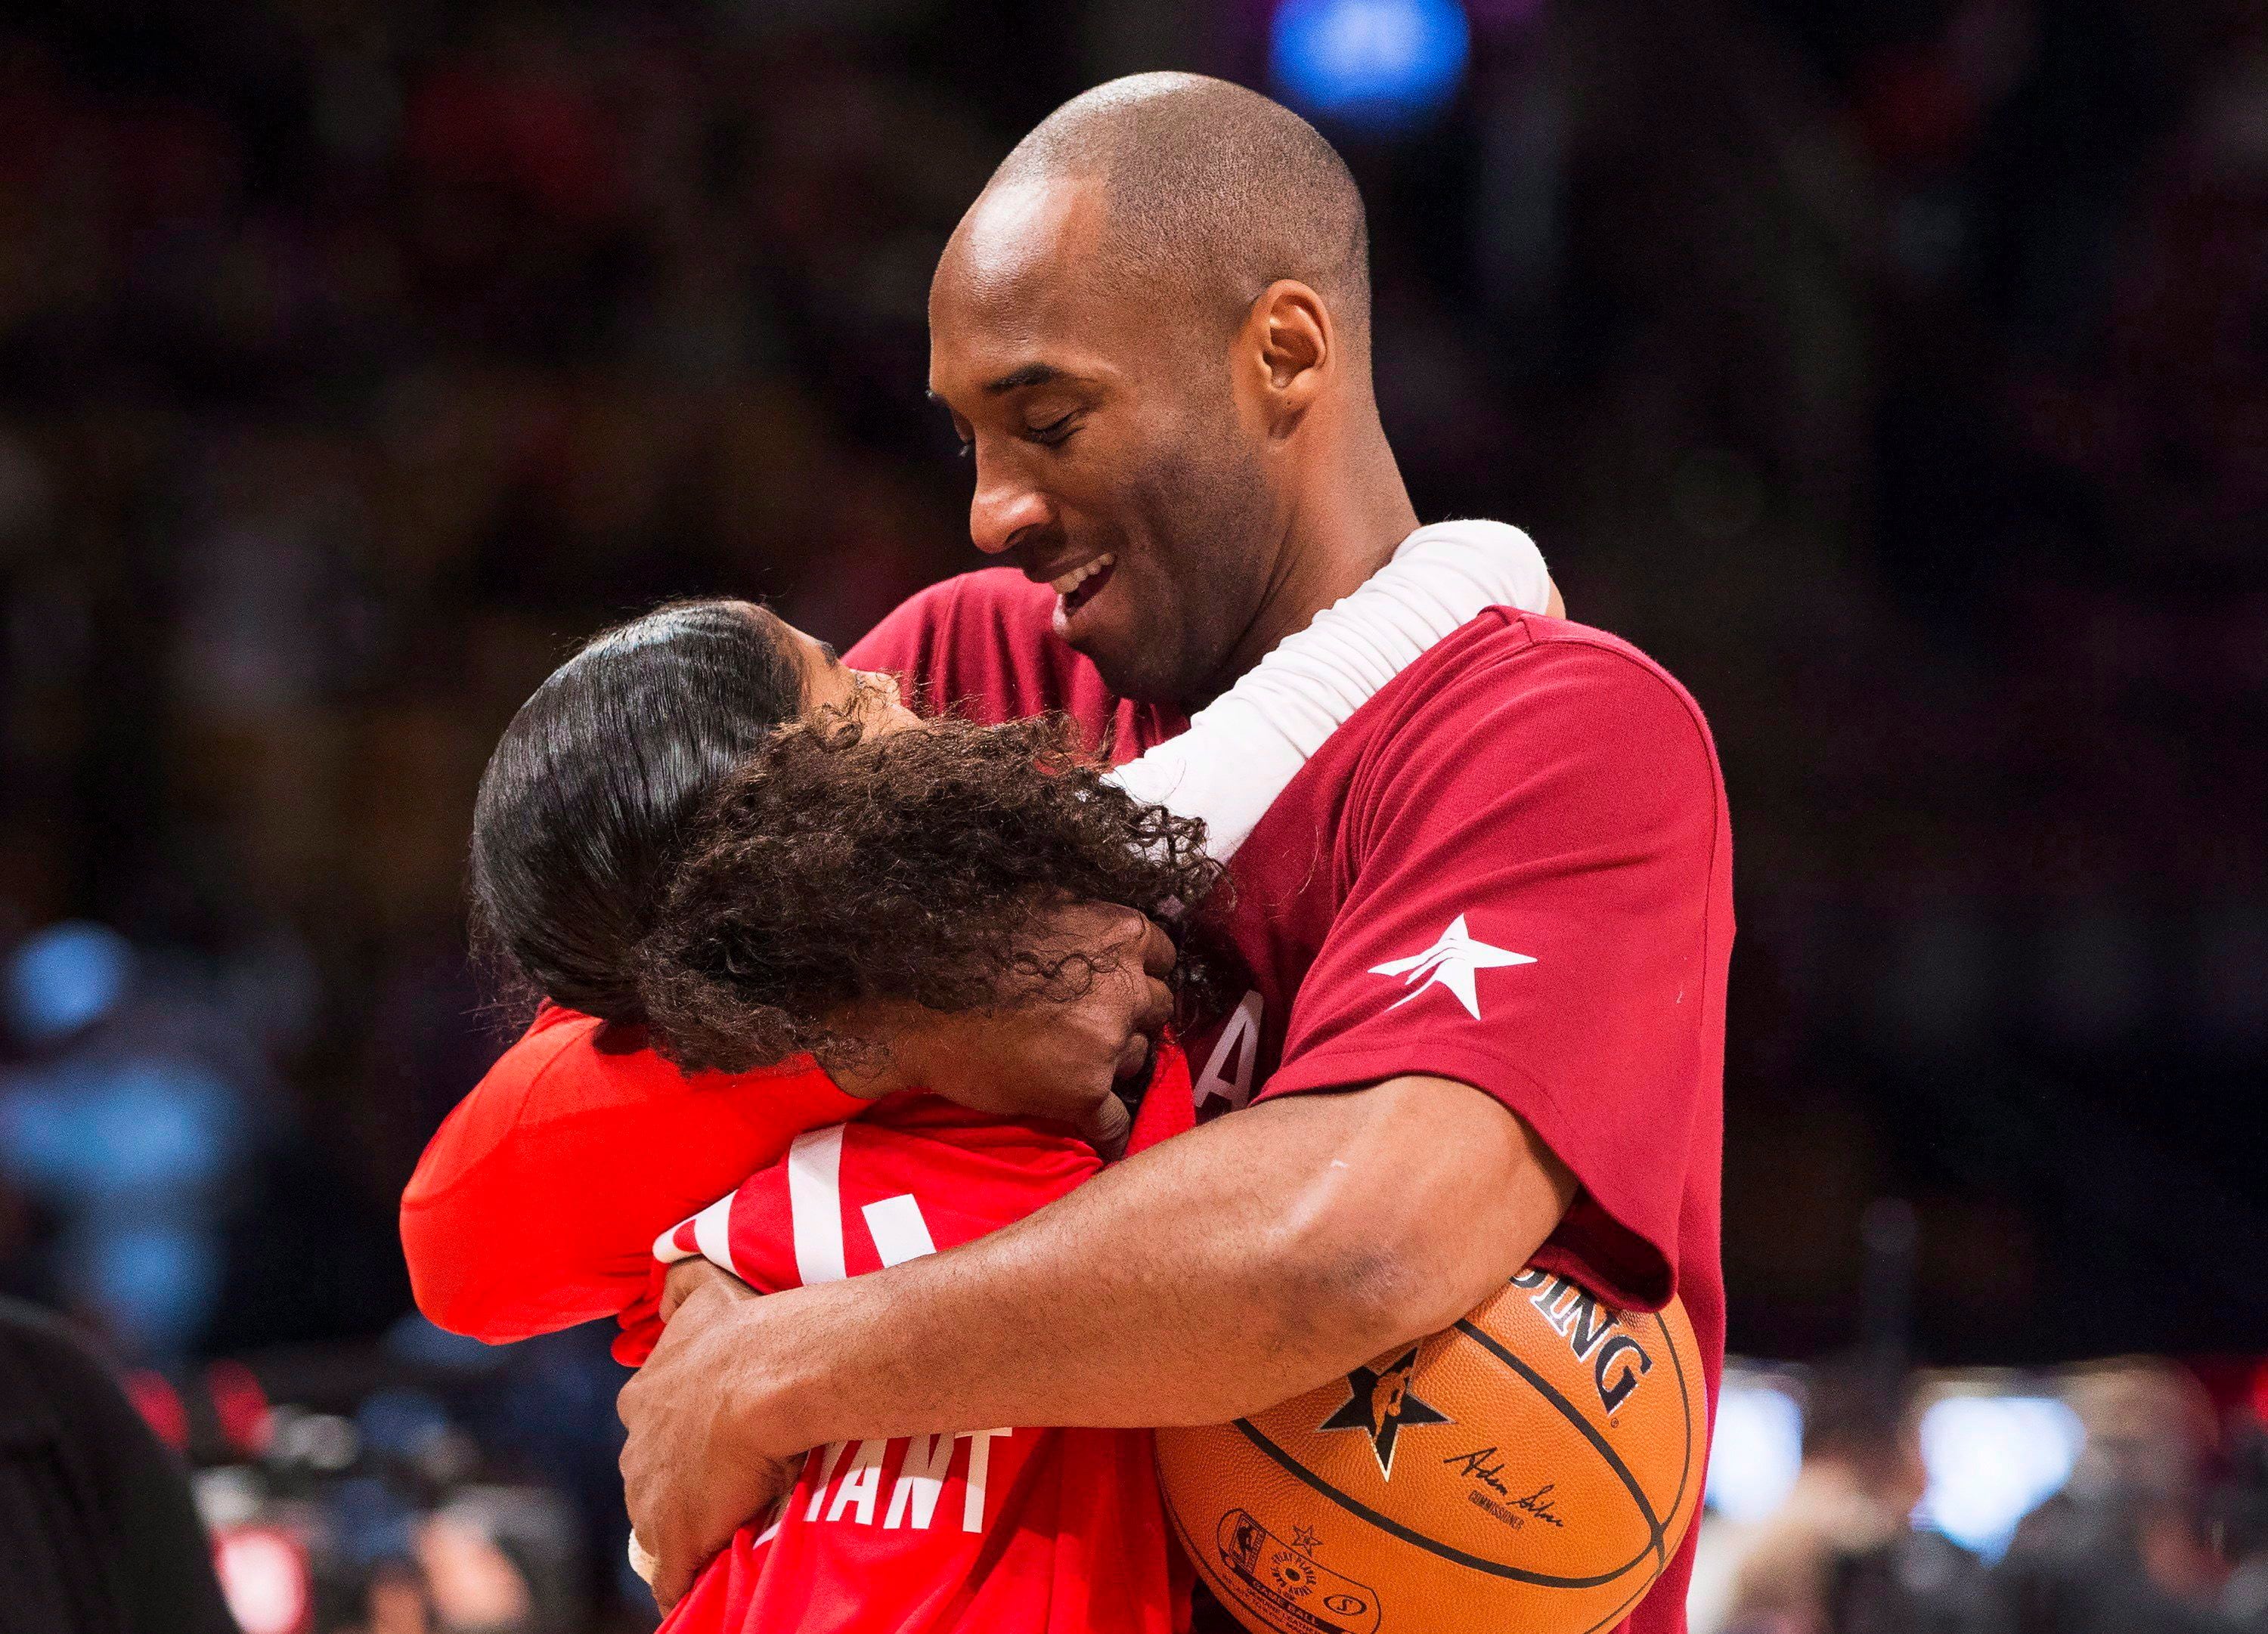 Athletes honor Kobe and Gianna Bryant after their deaths